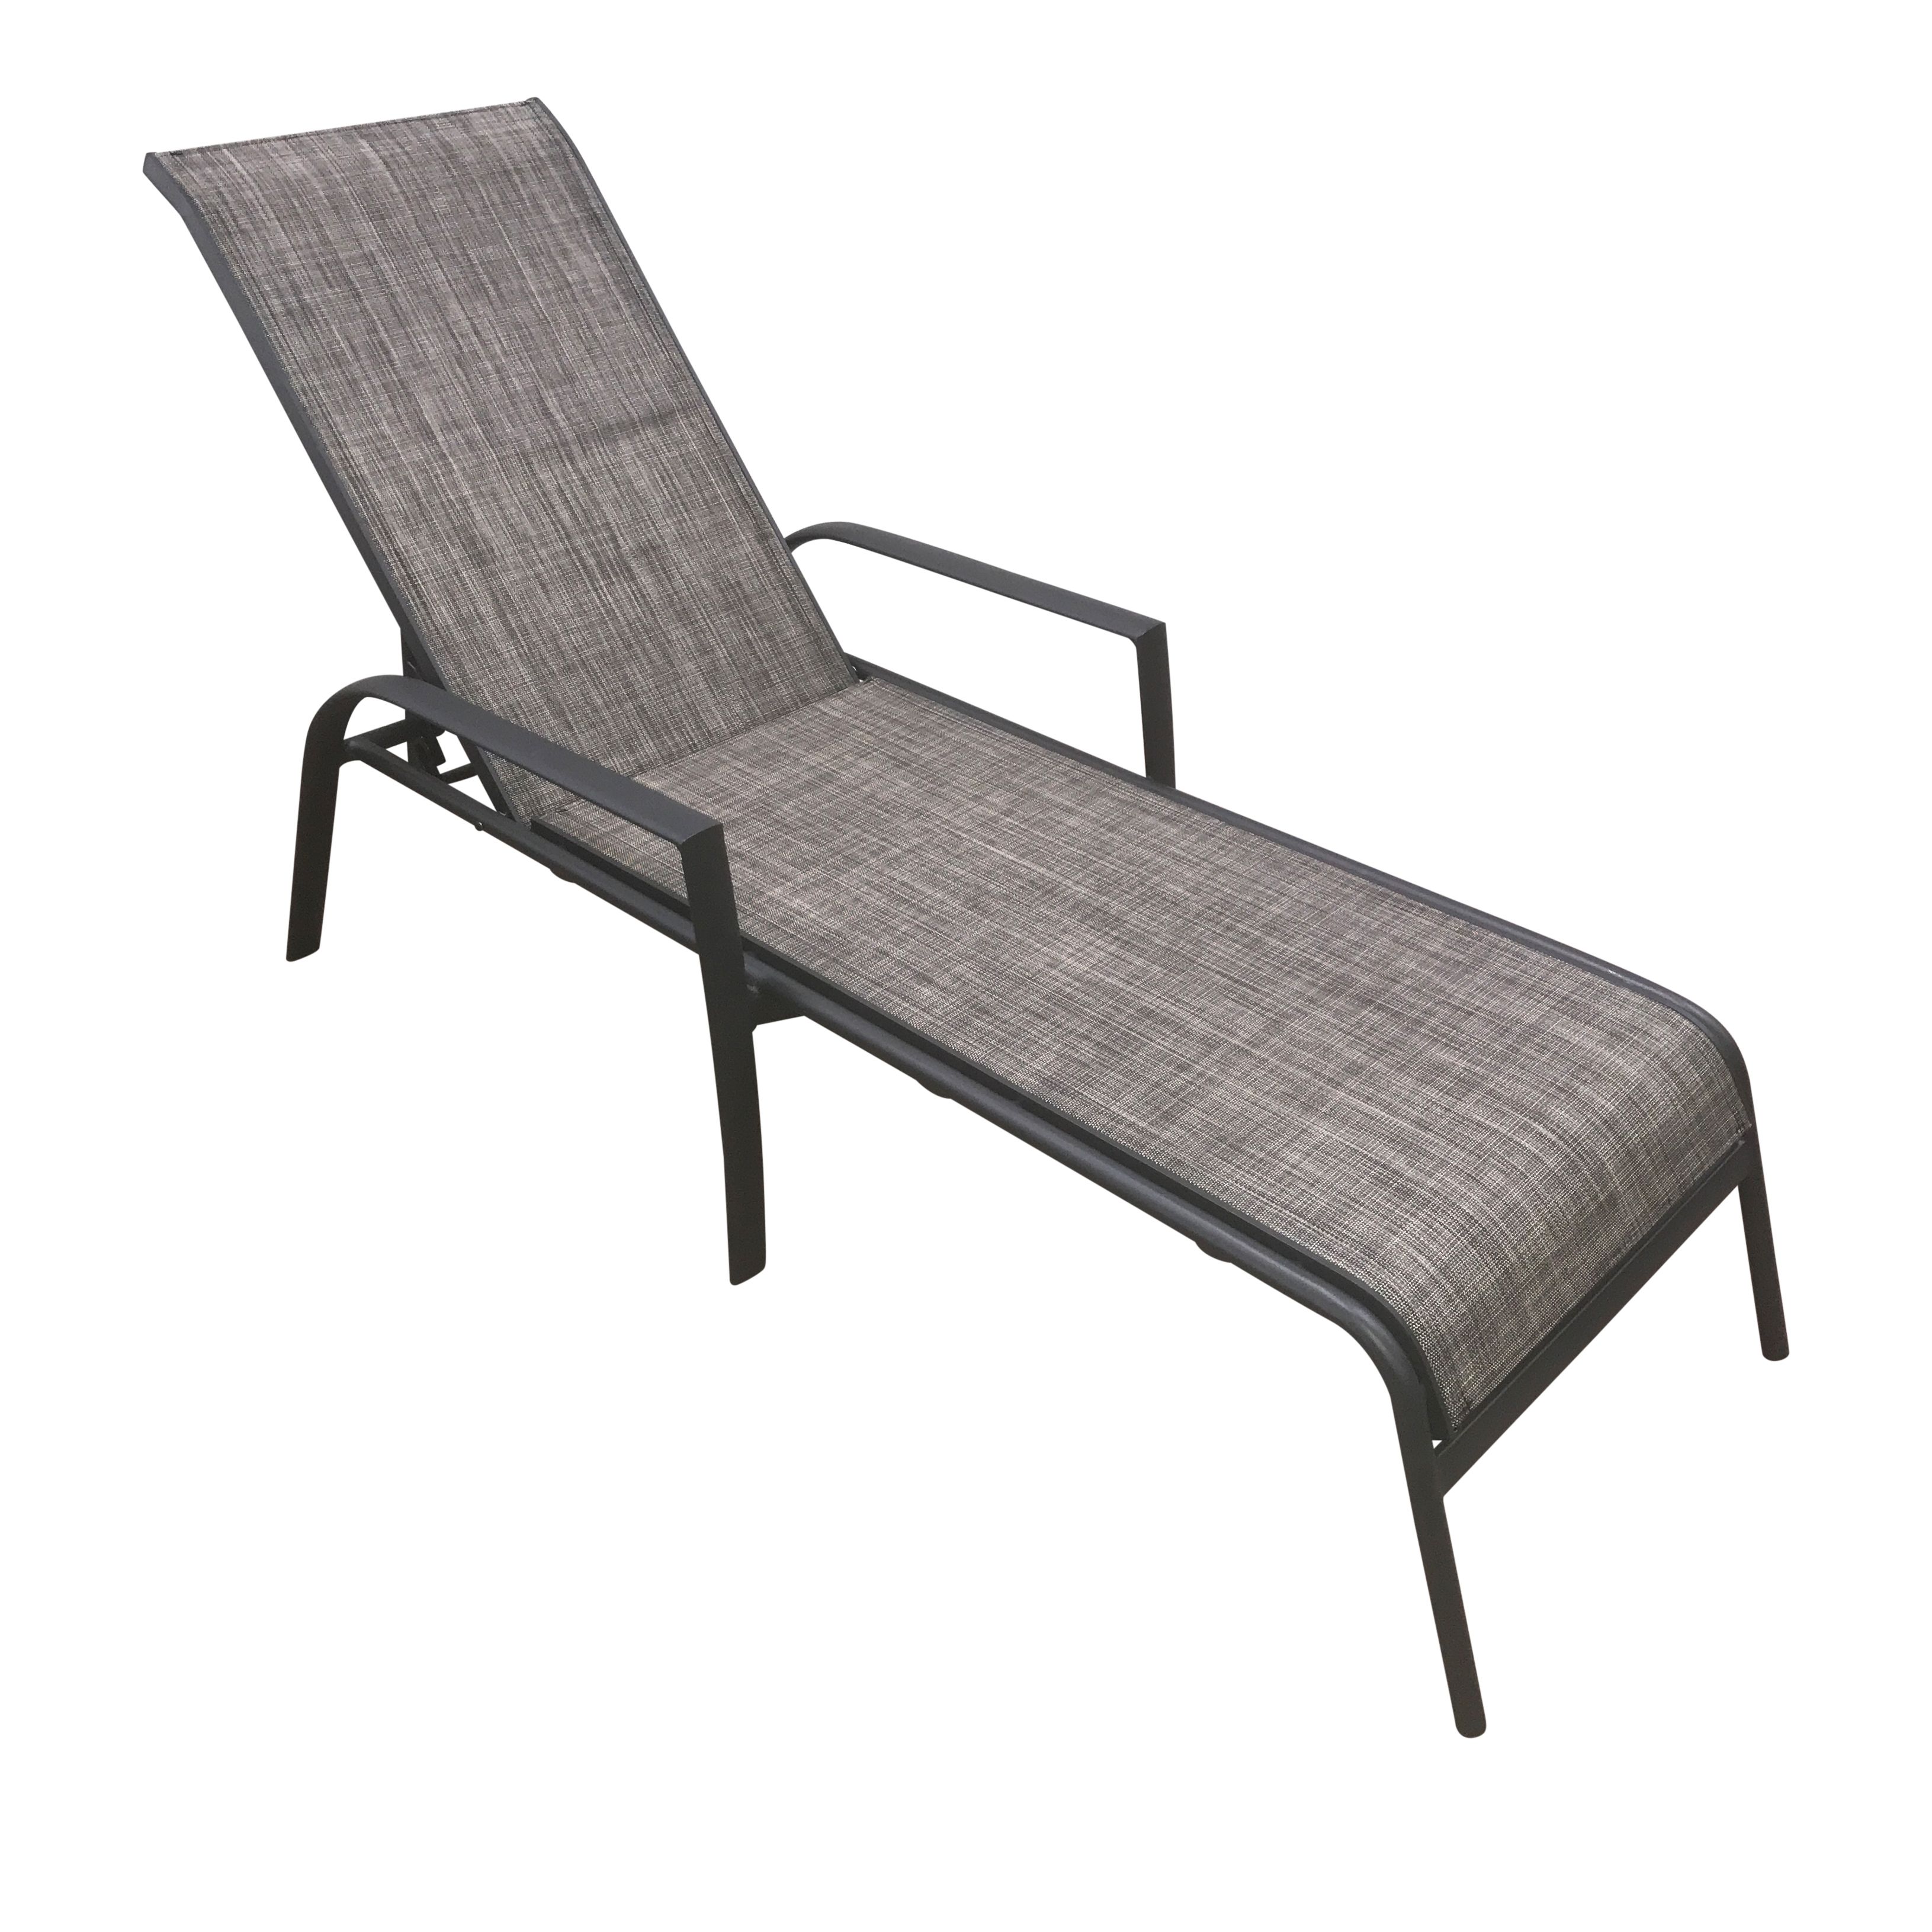 Fabric Outdoor Chaise Lounge Chairs With Latest Convertible Chair : For Bedroom Stackable Sling Chairs Stacking (View 13 of 15)